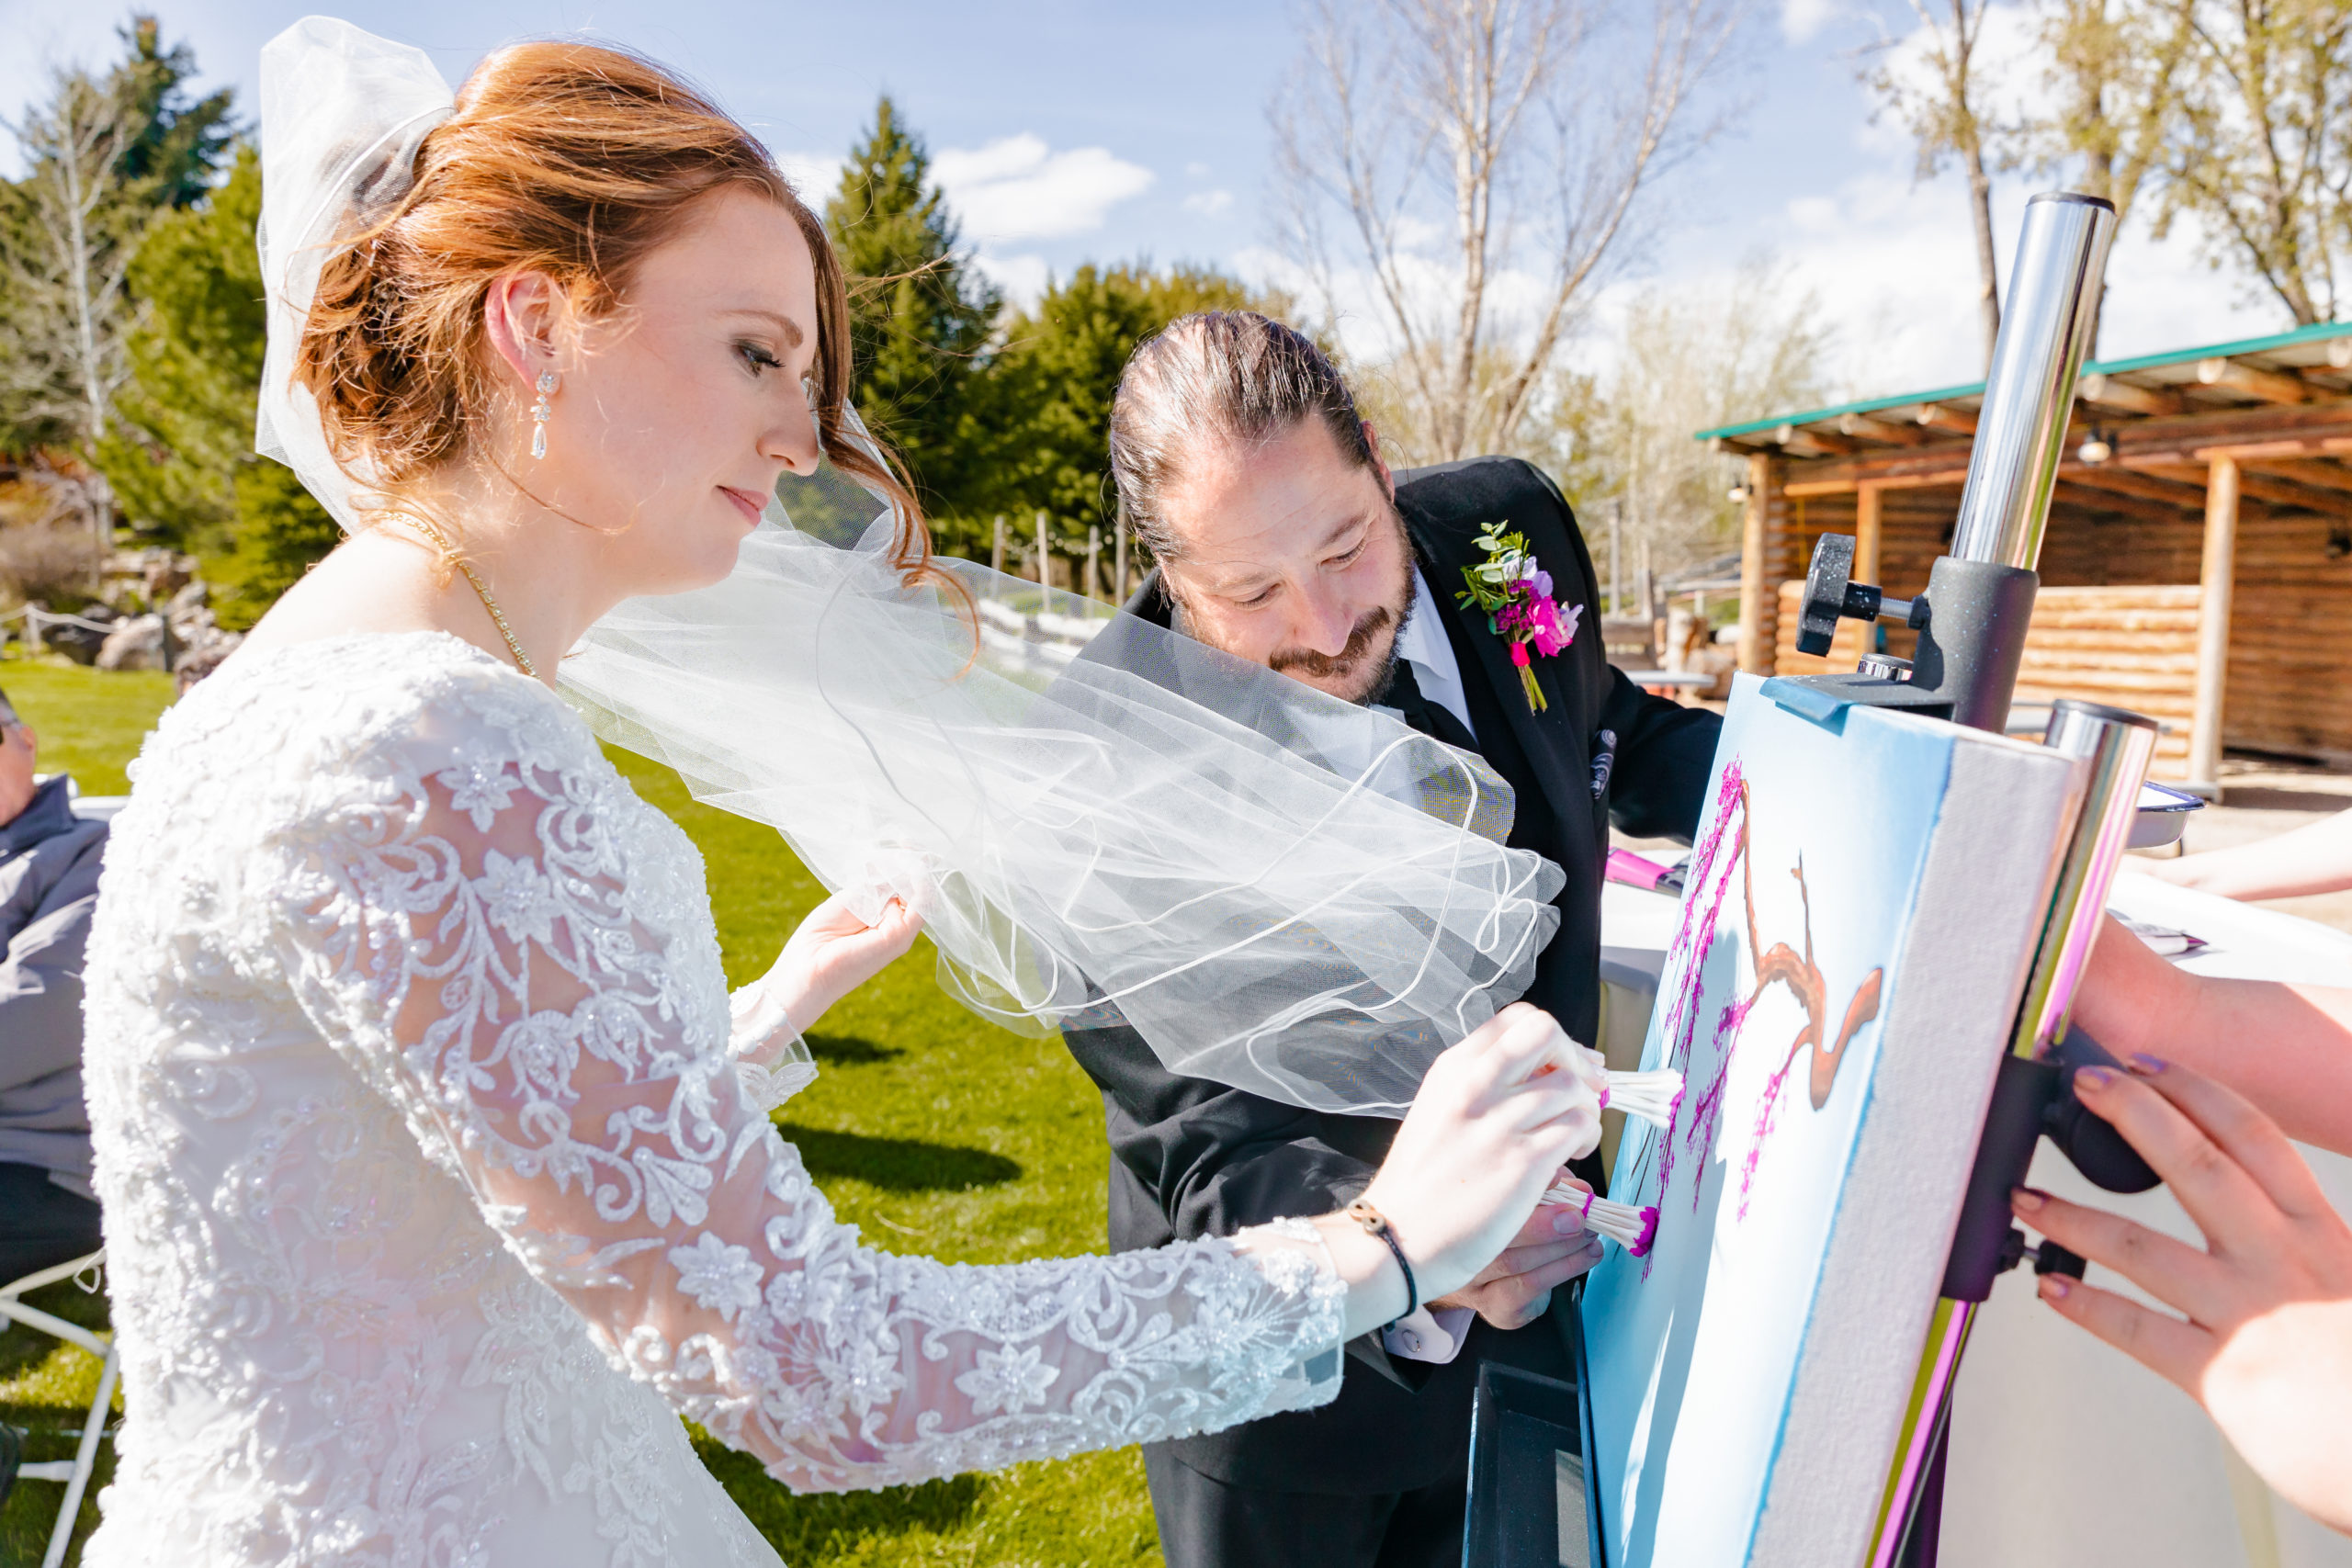 bride and groom painting at their wedding ceremony